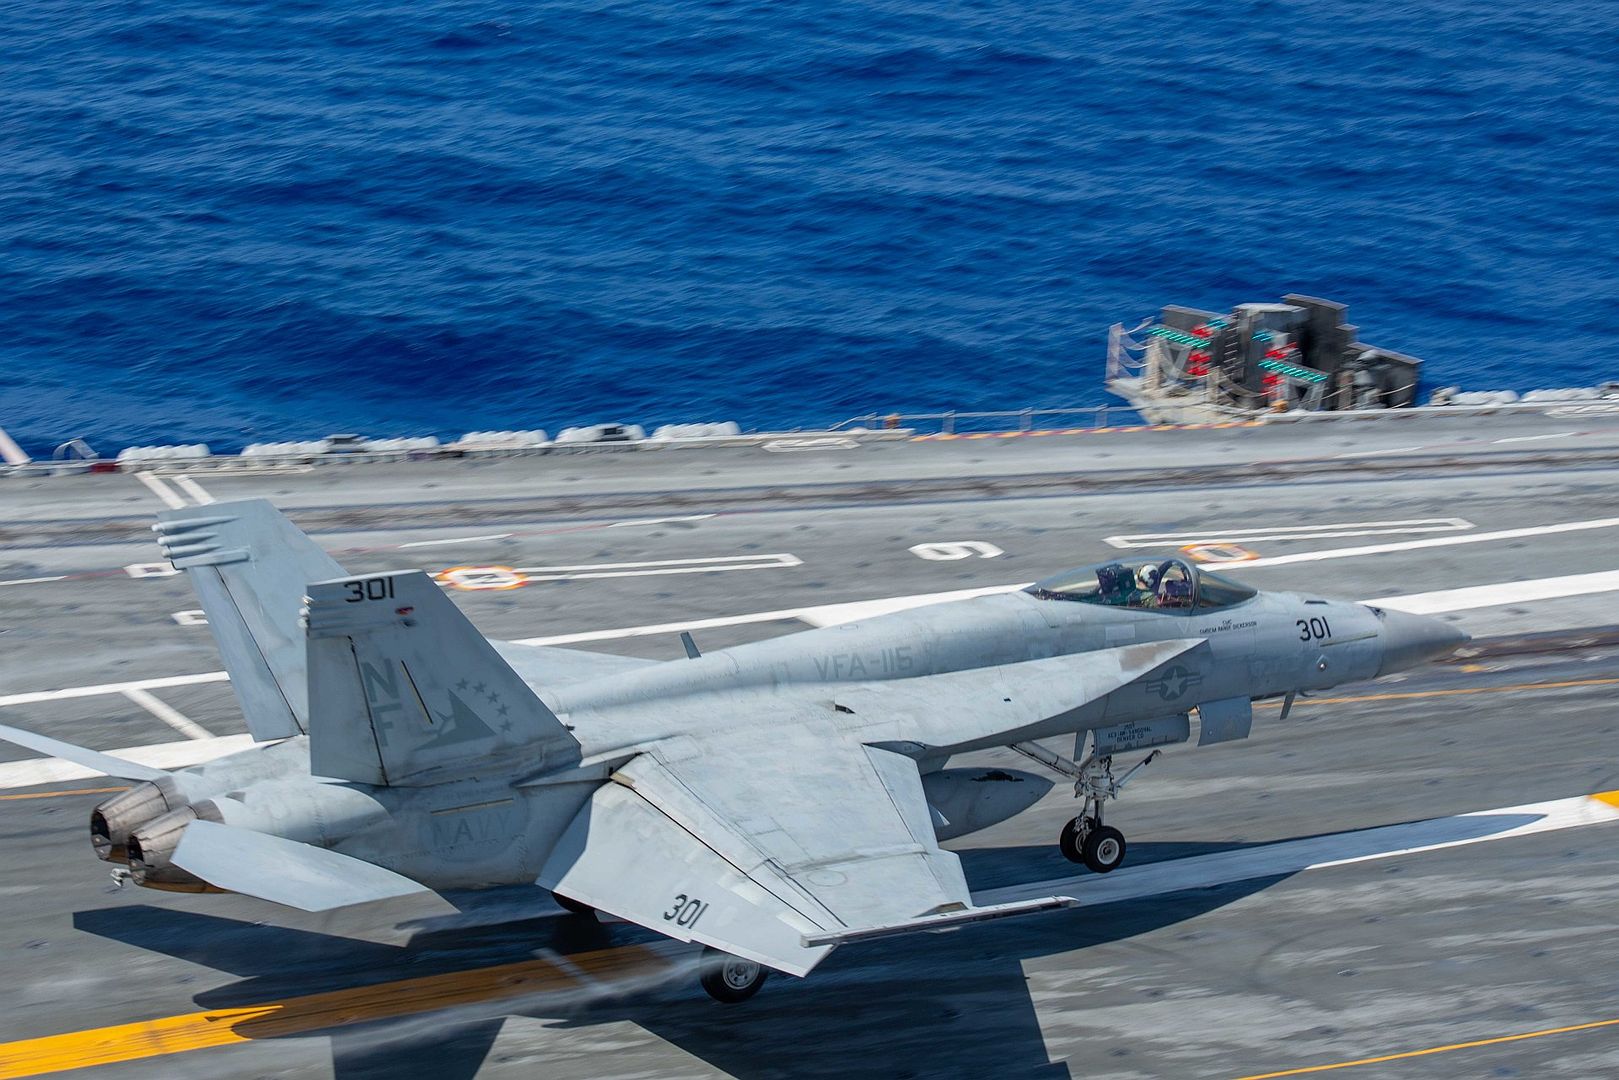  Navy S Only Forward Deployed Aircraft Carrier The USS Ronald Reagan